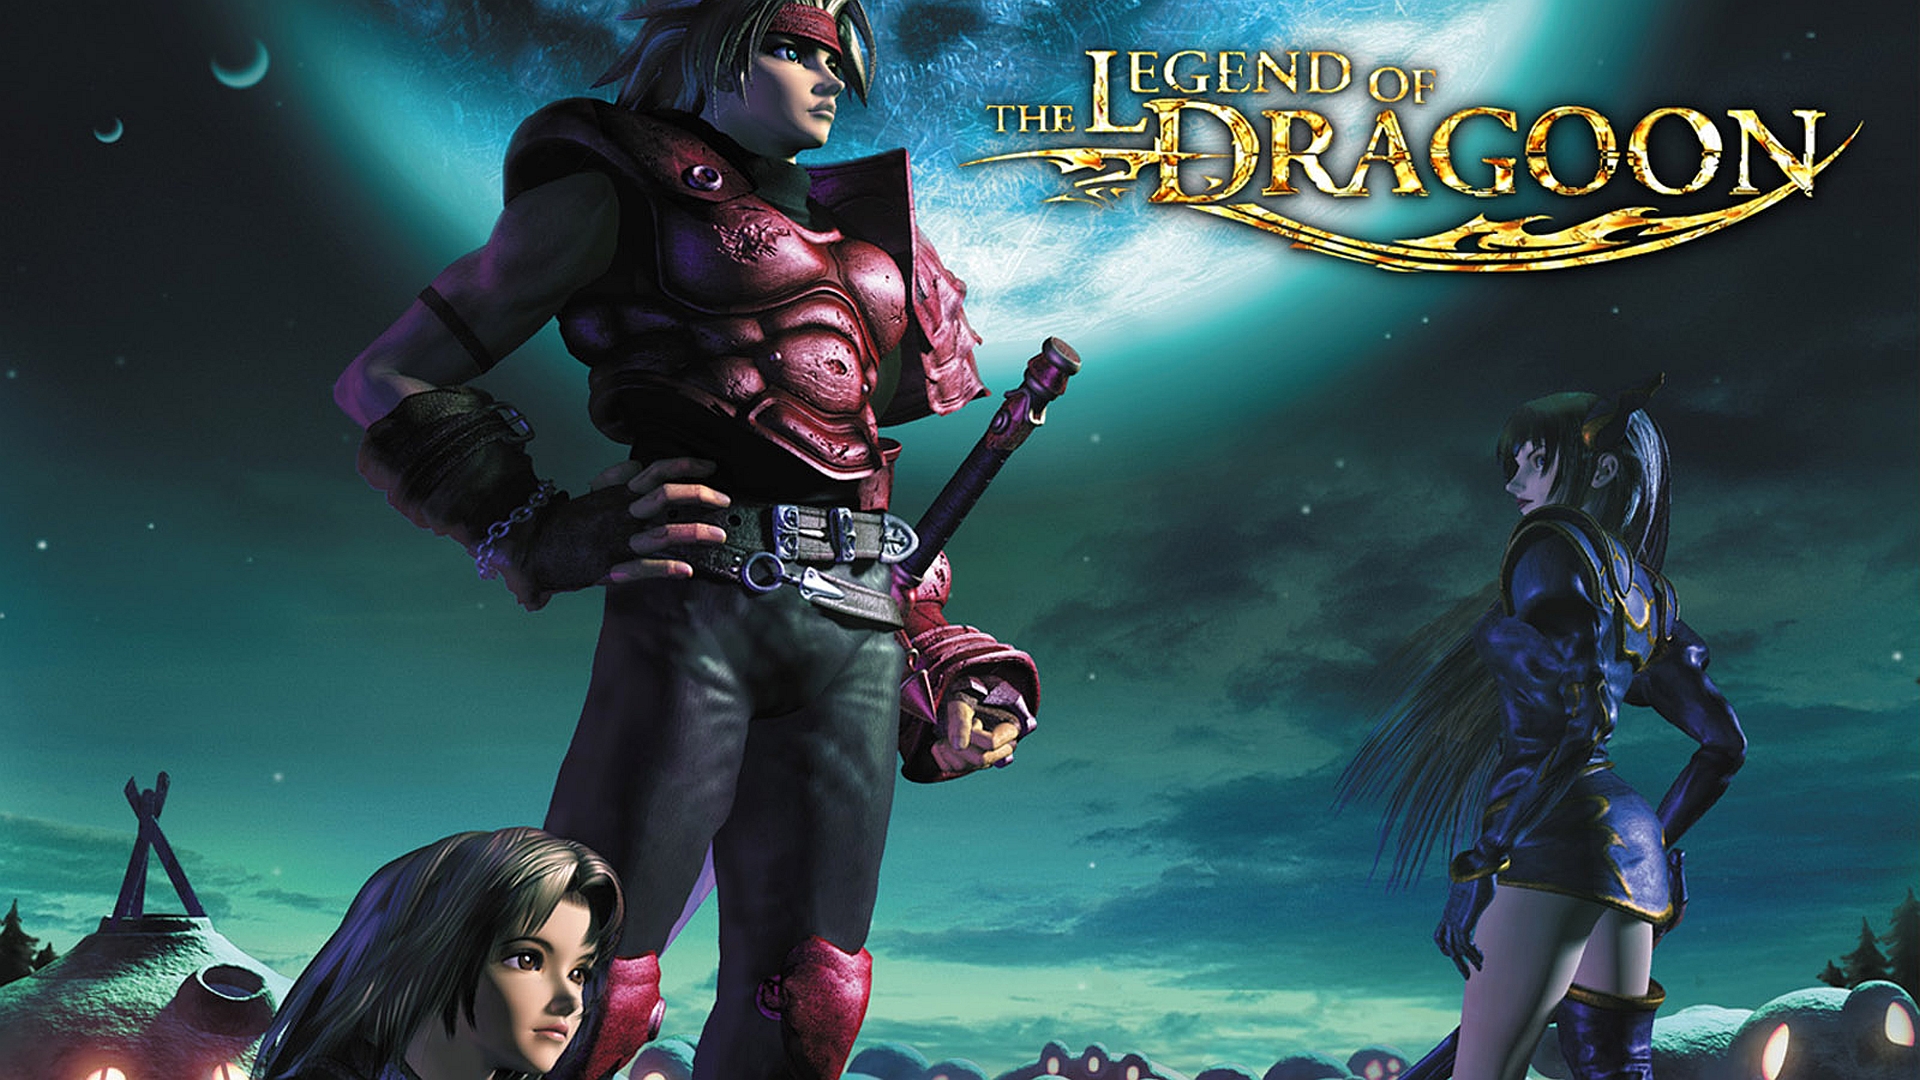 Video Game The Legend Of Dragoon 1920x1080